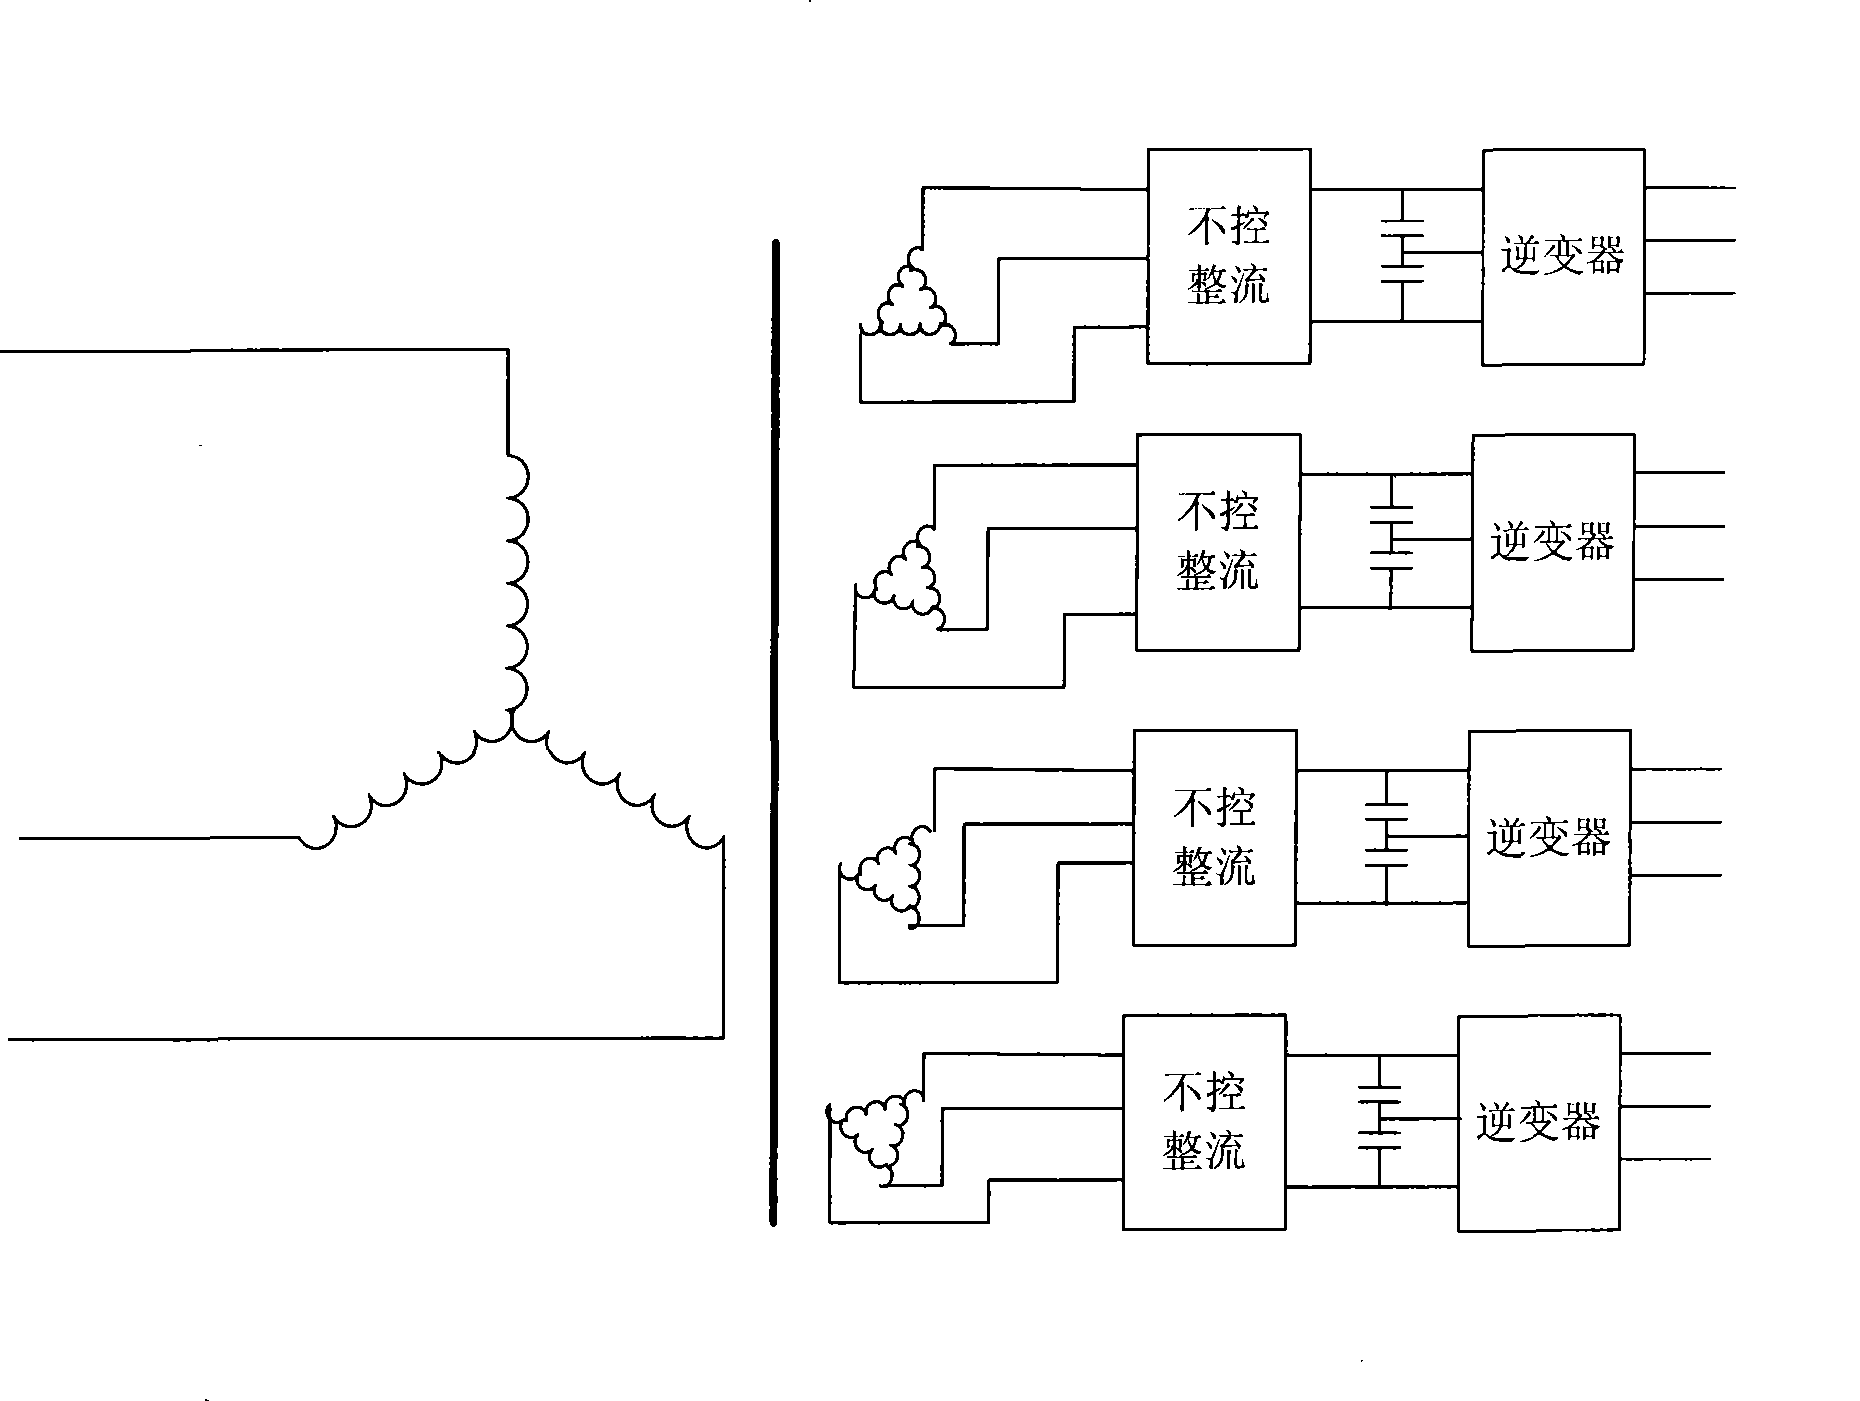 Large capacity cascade multi-phase multi-level power converter without transformer